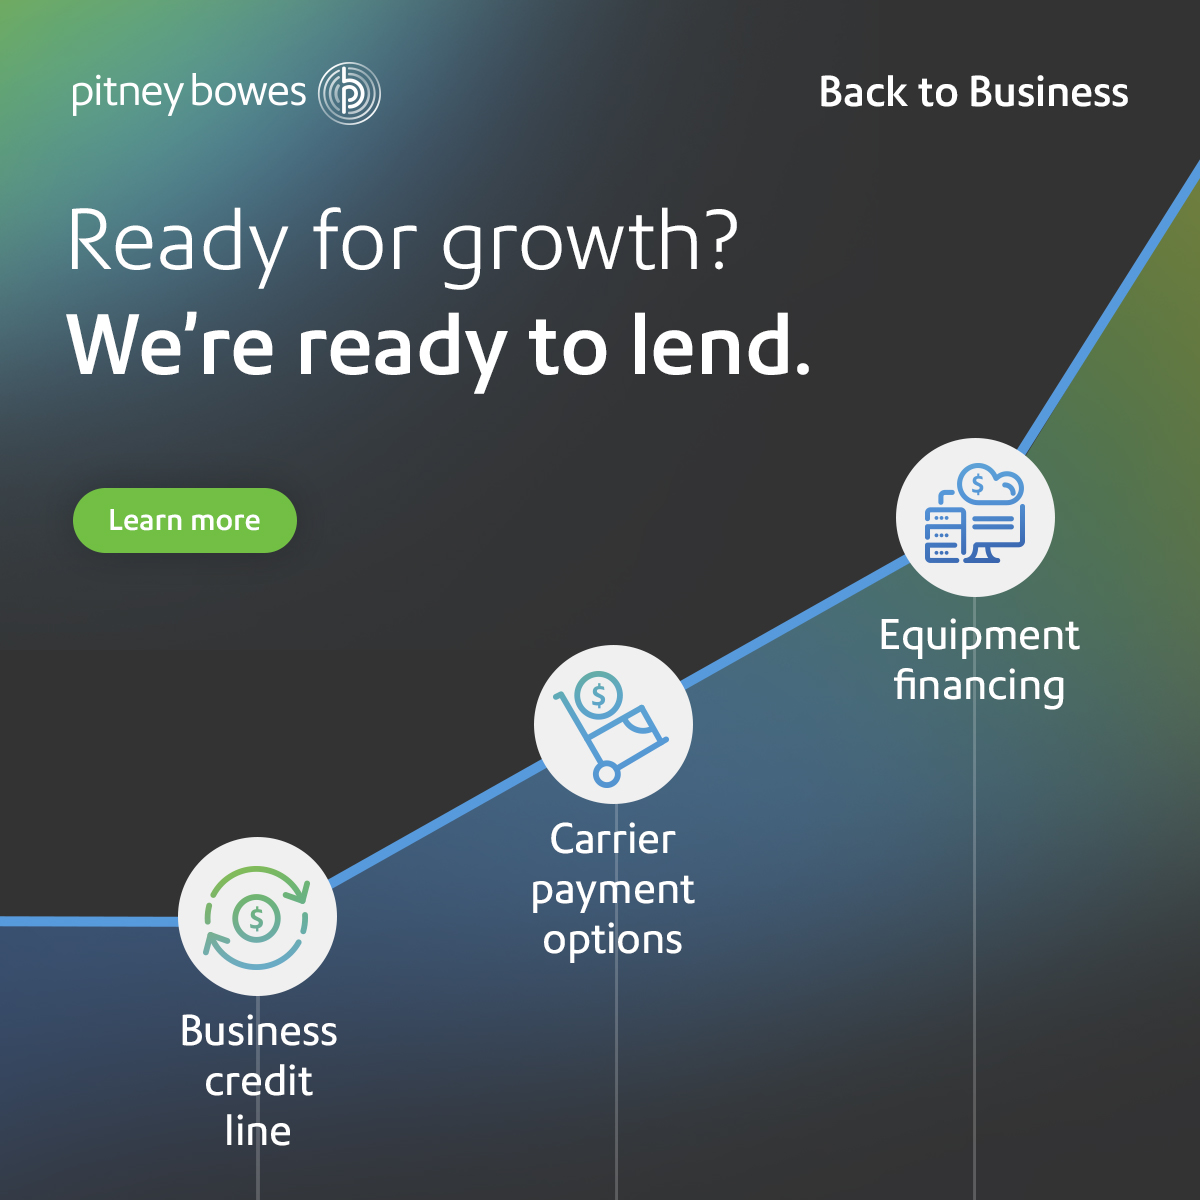 Back to Business campaign for Pitney Bowes Financial Services - social media examples - Joseph Ehlinger copywriter